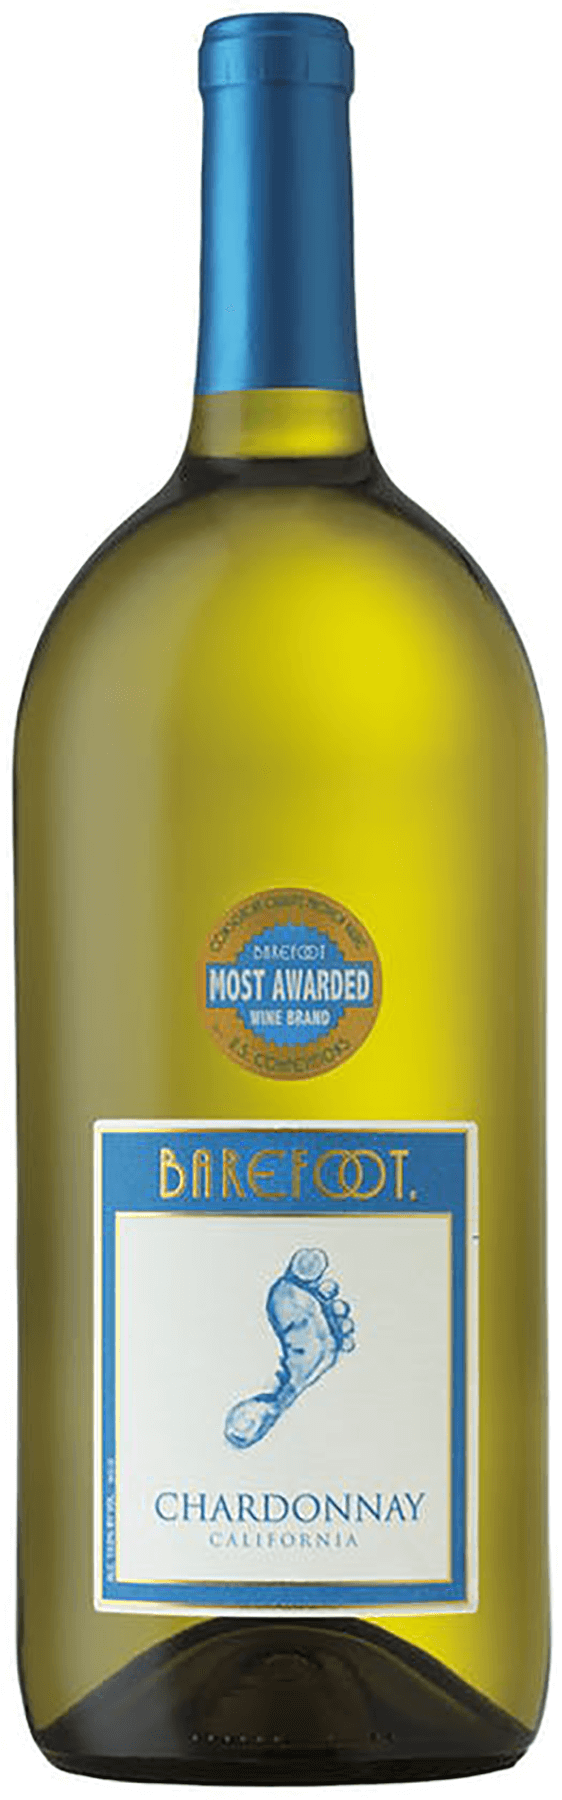 images/wine/WHITE WINE/Barefoot Chardonnay 1.5L.png